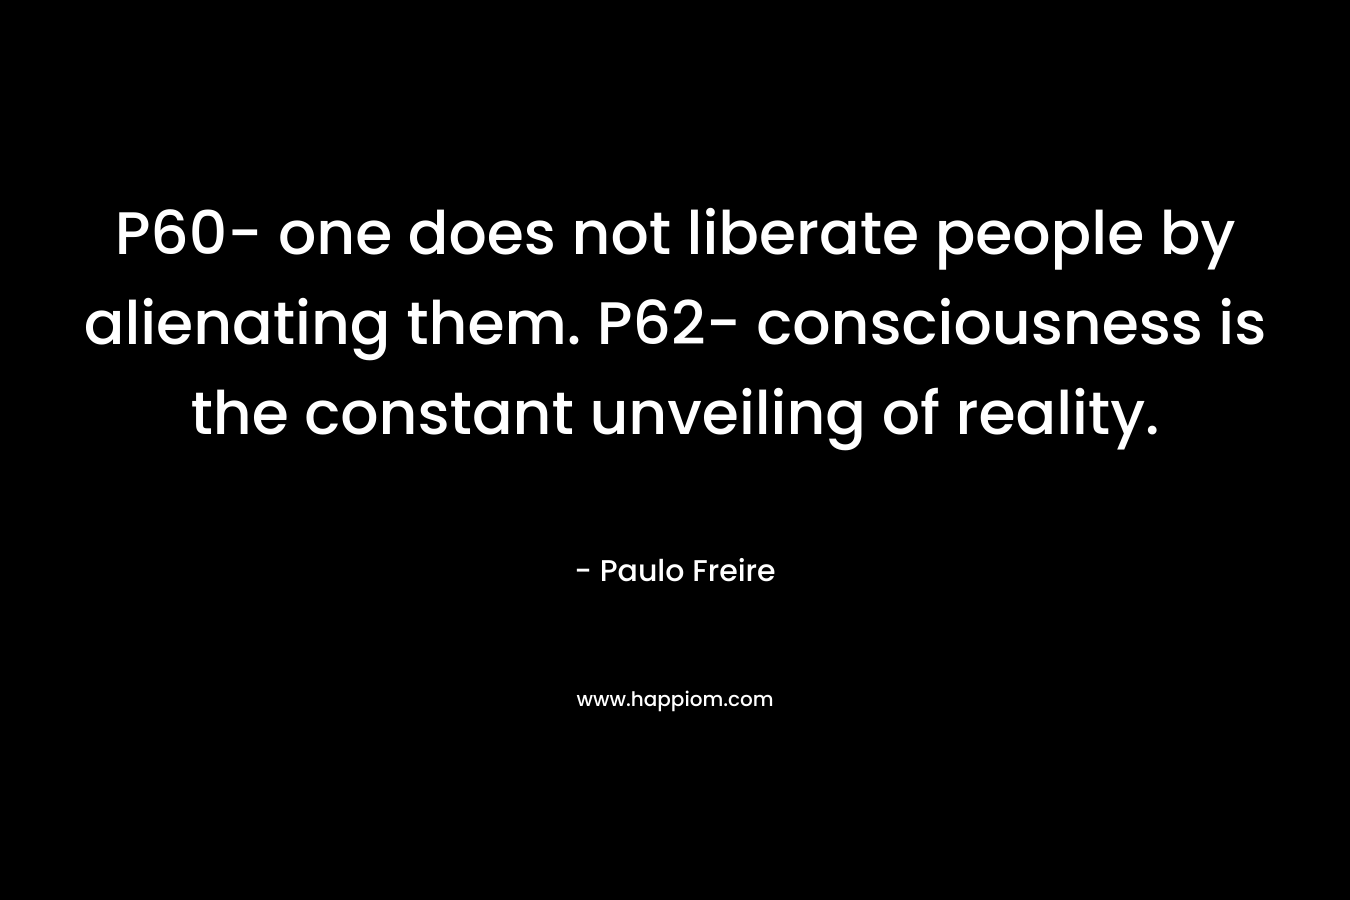 P60- one does not liberate people by alienating them. P62- consciousness is the constant unveiling of reality. – Paulo Freire